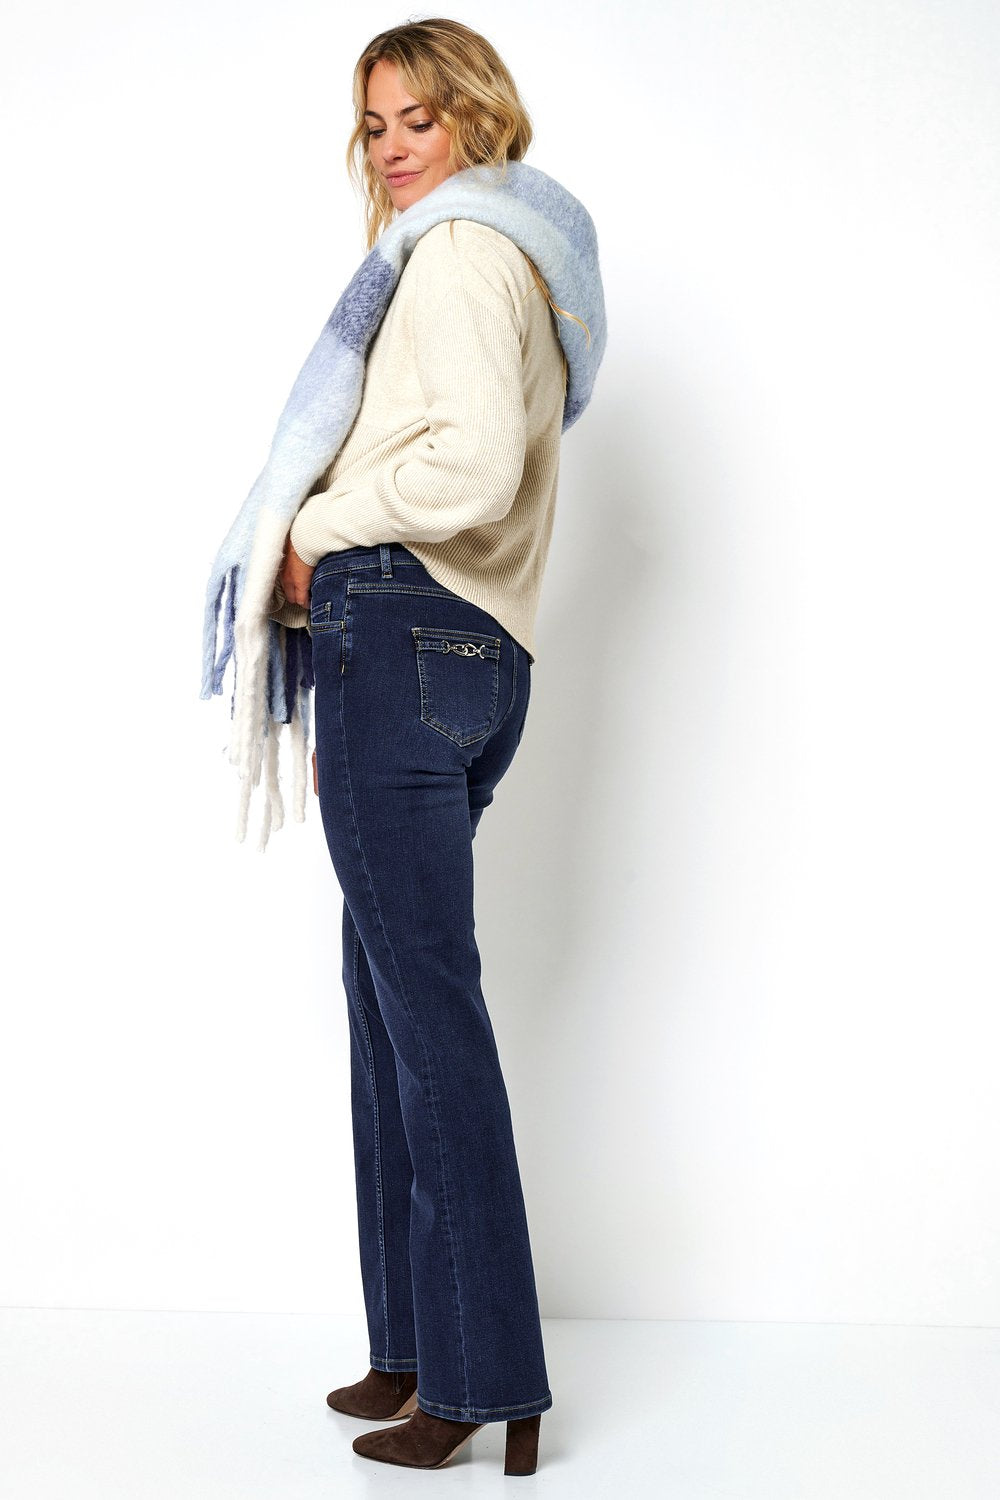 Perfect Shape Bootcut Jeans 1106-24